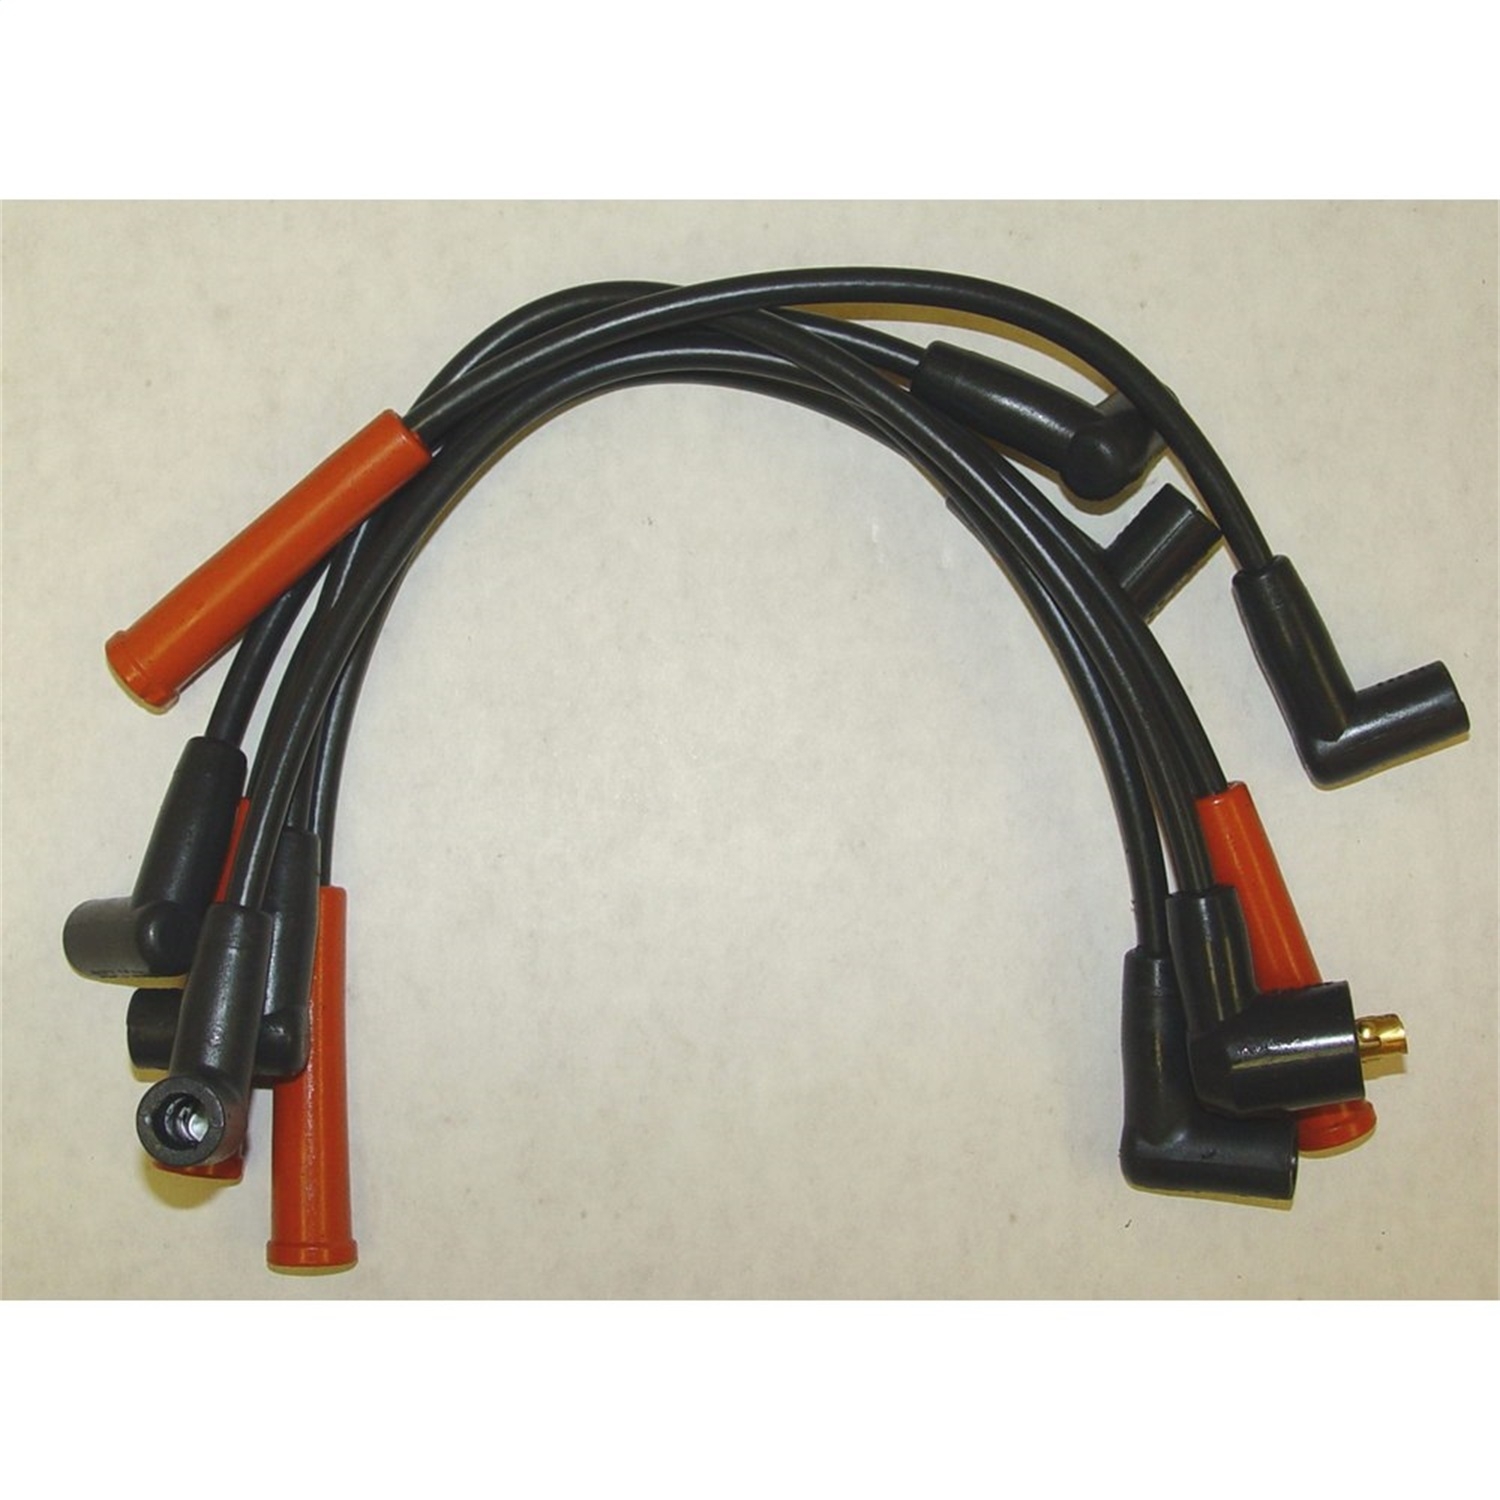 Omix This Ignition Wire Set From Omix Fits The 2.4L Engine In 03-06 Jeep Wrangler, 2.5L Engine In